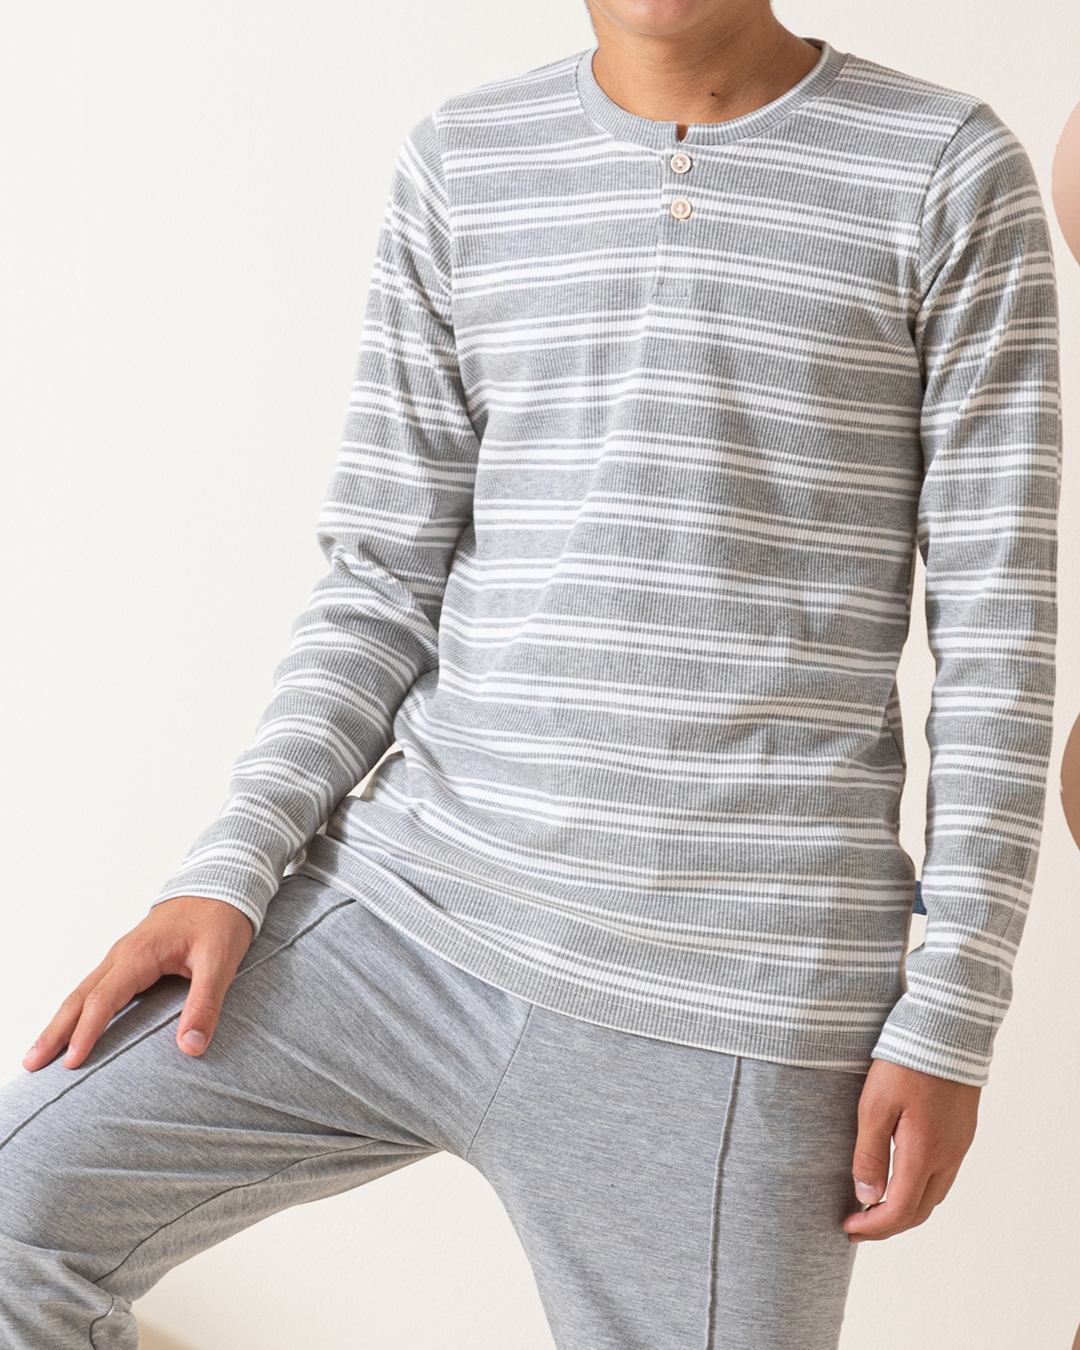 Long-sleeved Ribbed Cotton shirts with a button placket.